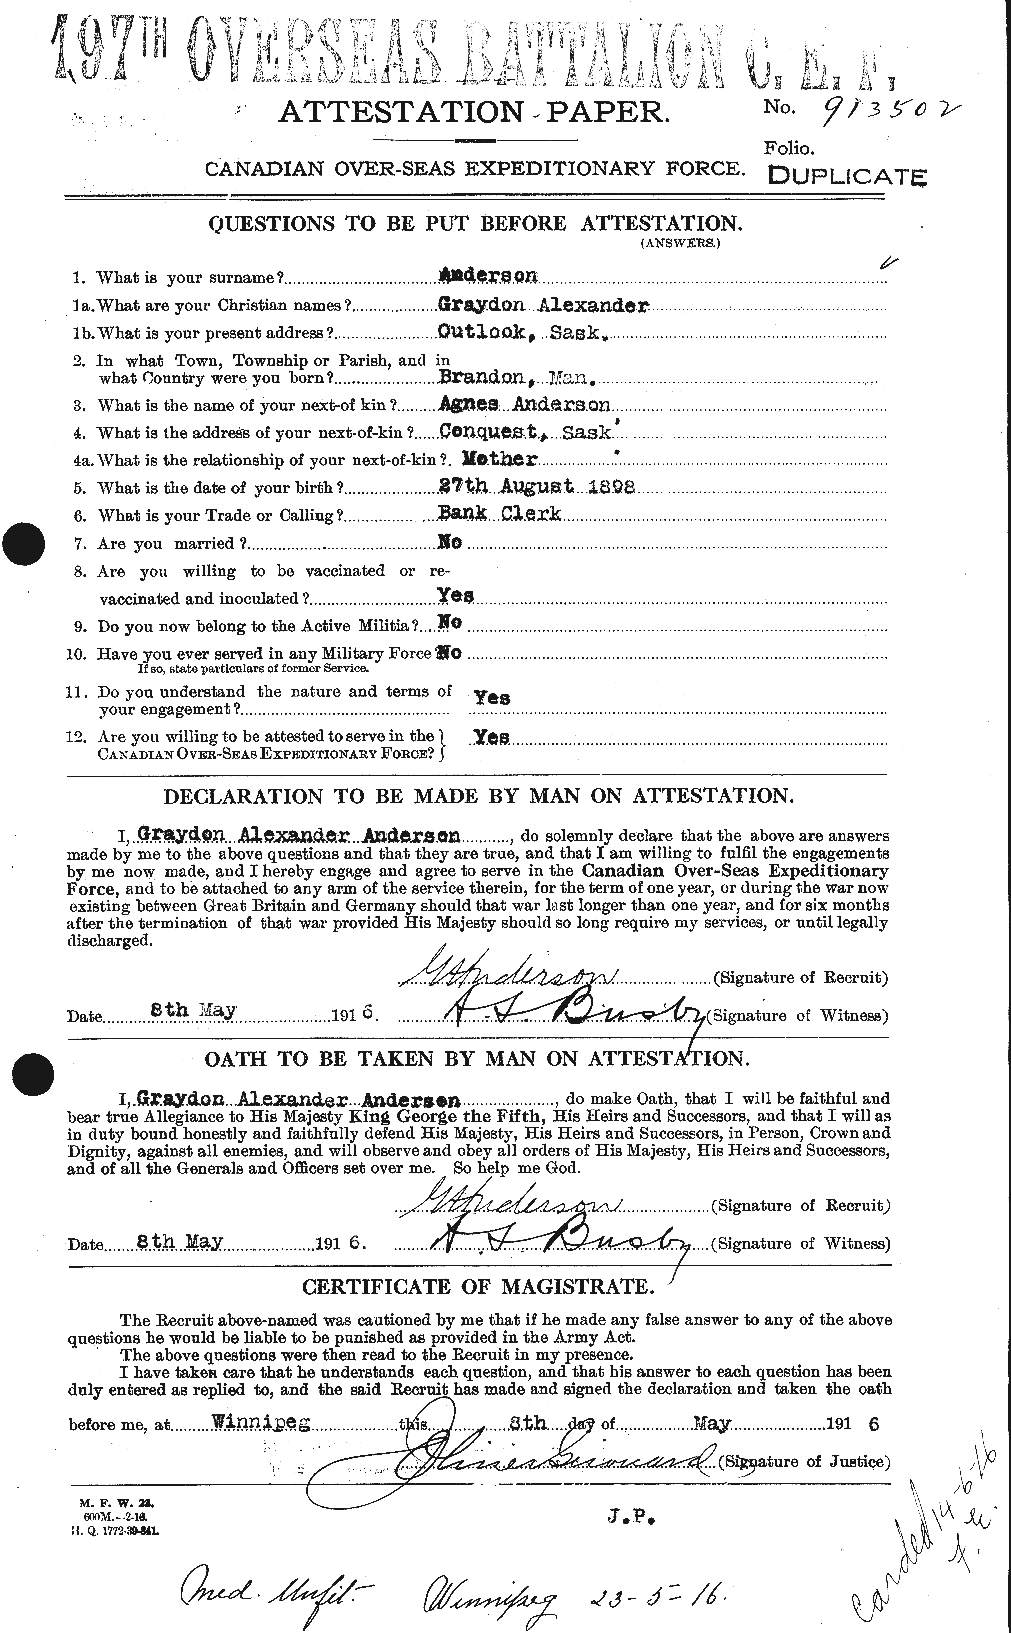 Personnel Records of the First World War - CEF 209659a